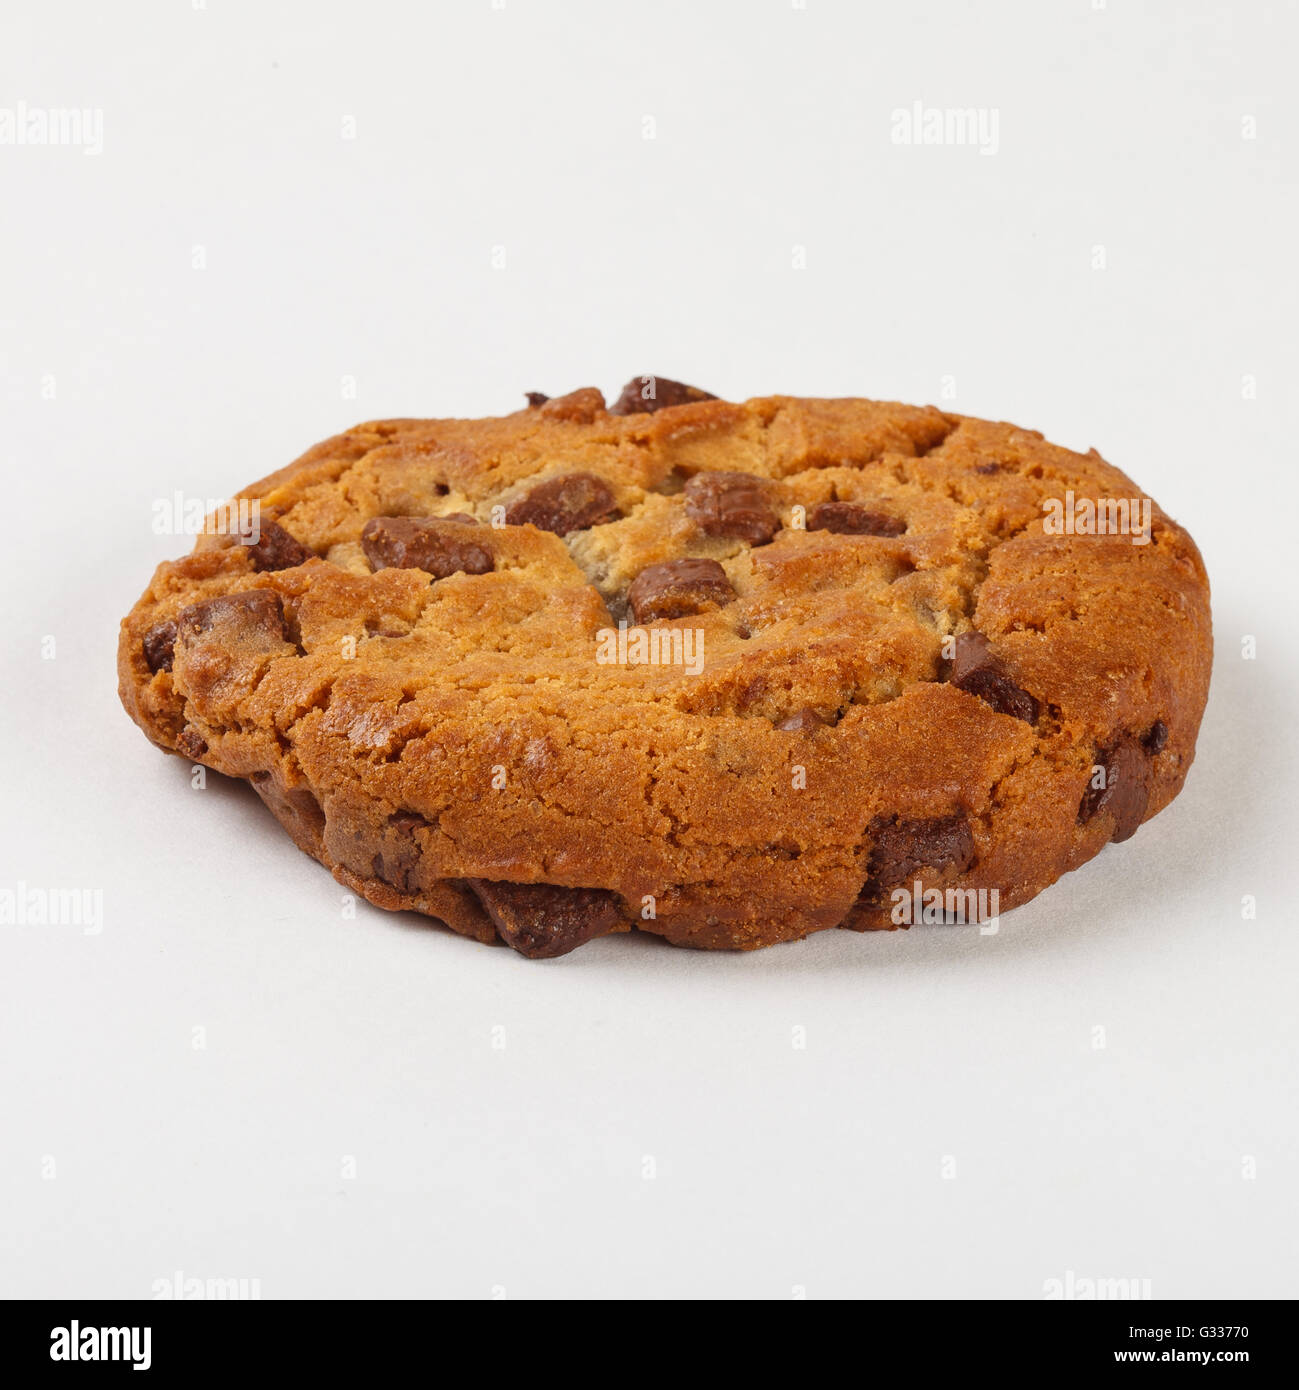 Delicious  biscuit cookie with chocolate chips white background. Close up side view. Stock Photo